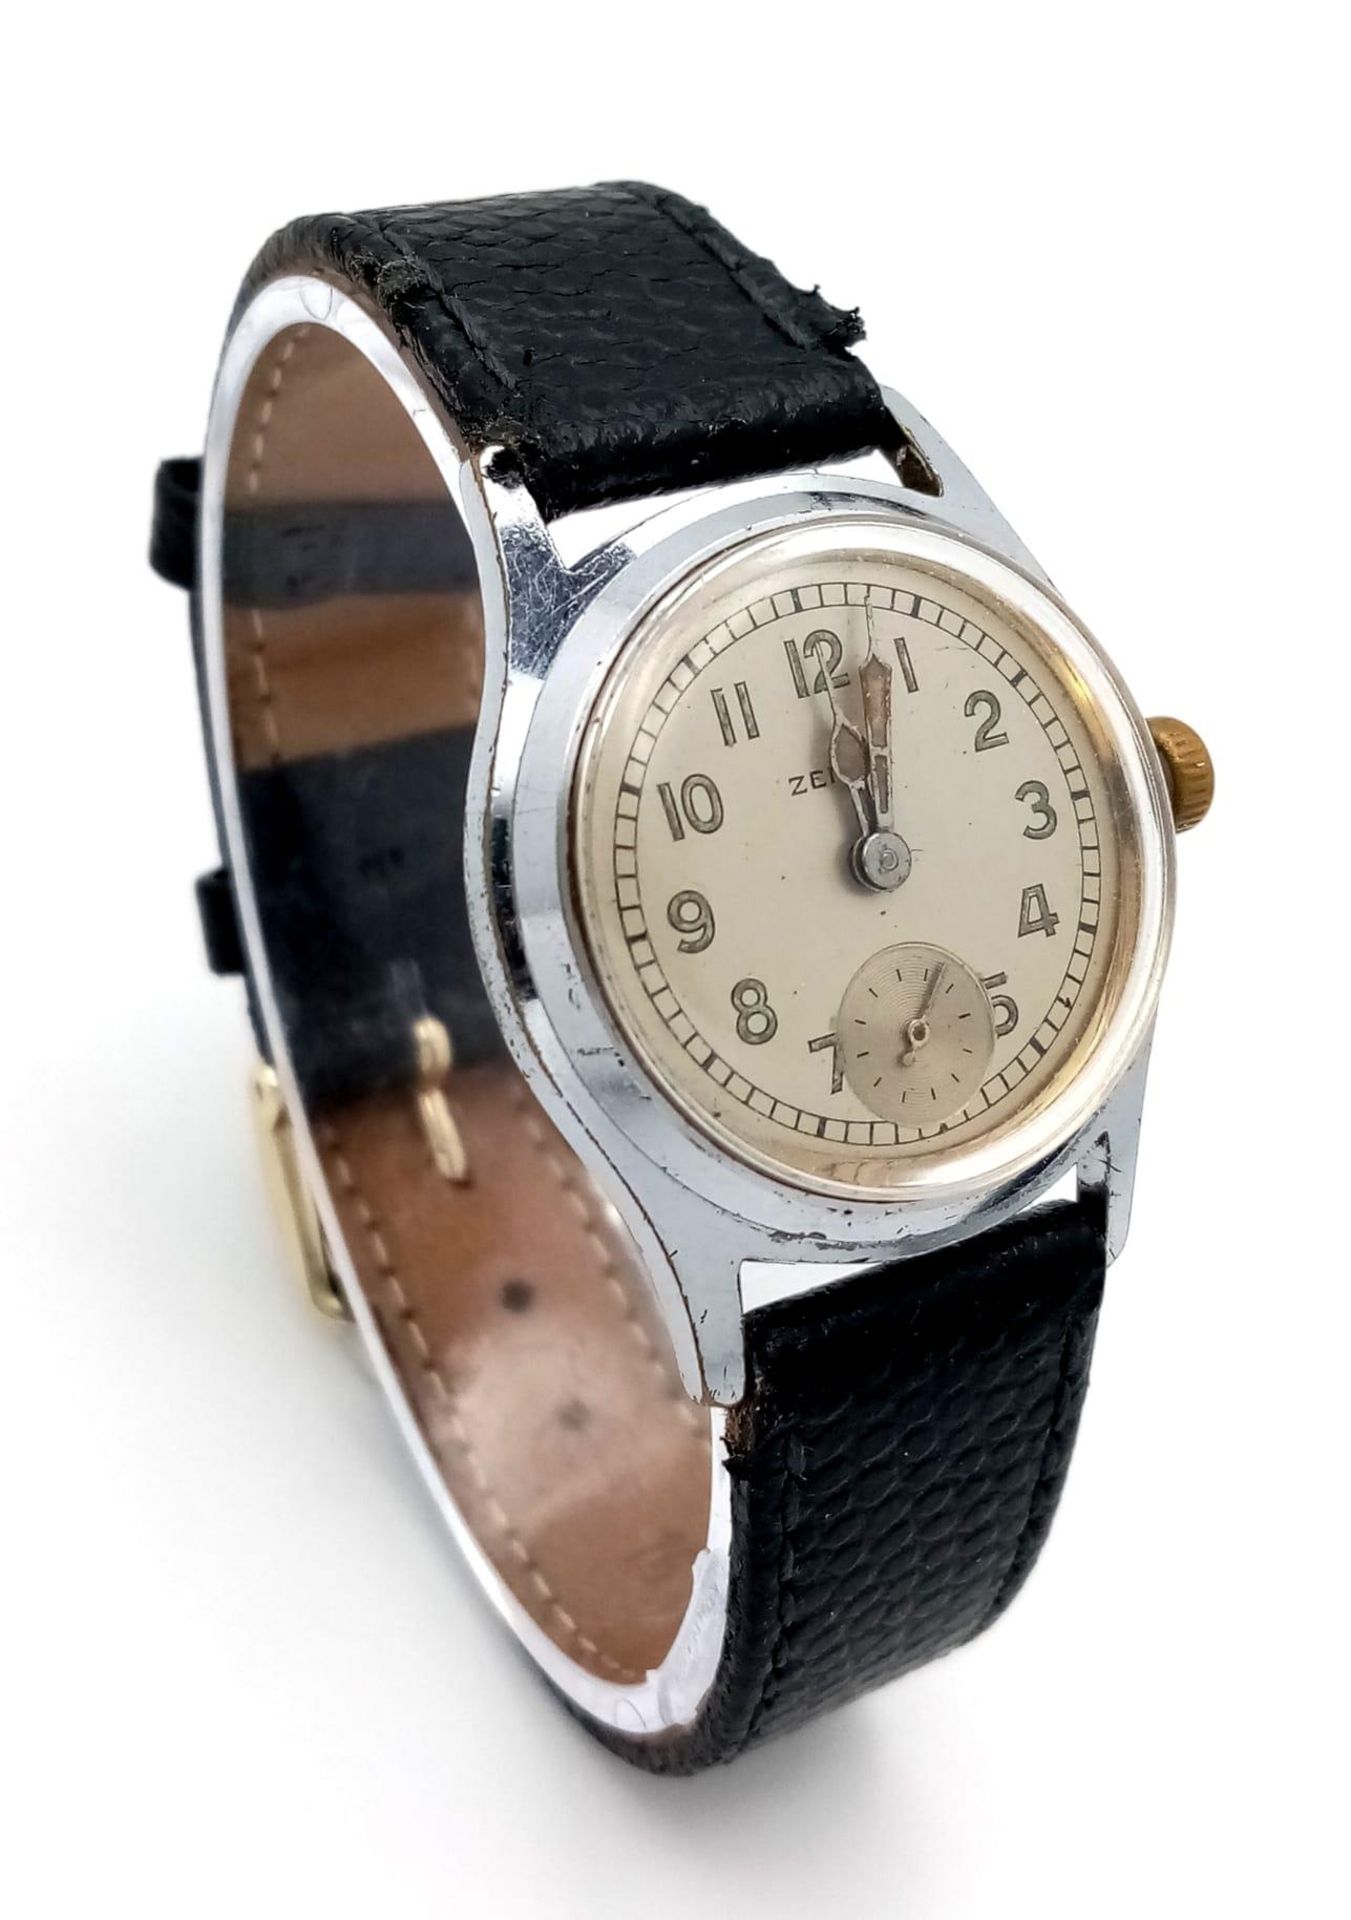 A Vintage Zenith Ladies Watch. Brown leather strap. Stainless steel case - 28mm. Silver tone dial - Image 2 of 8